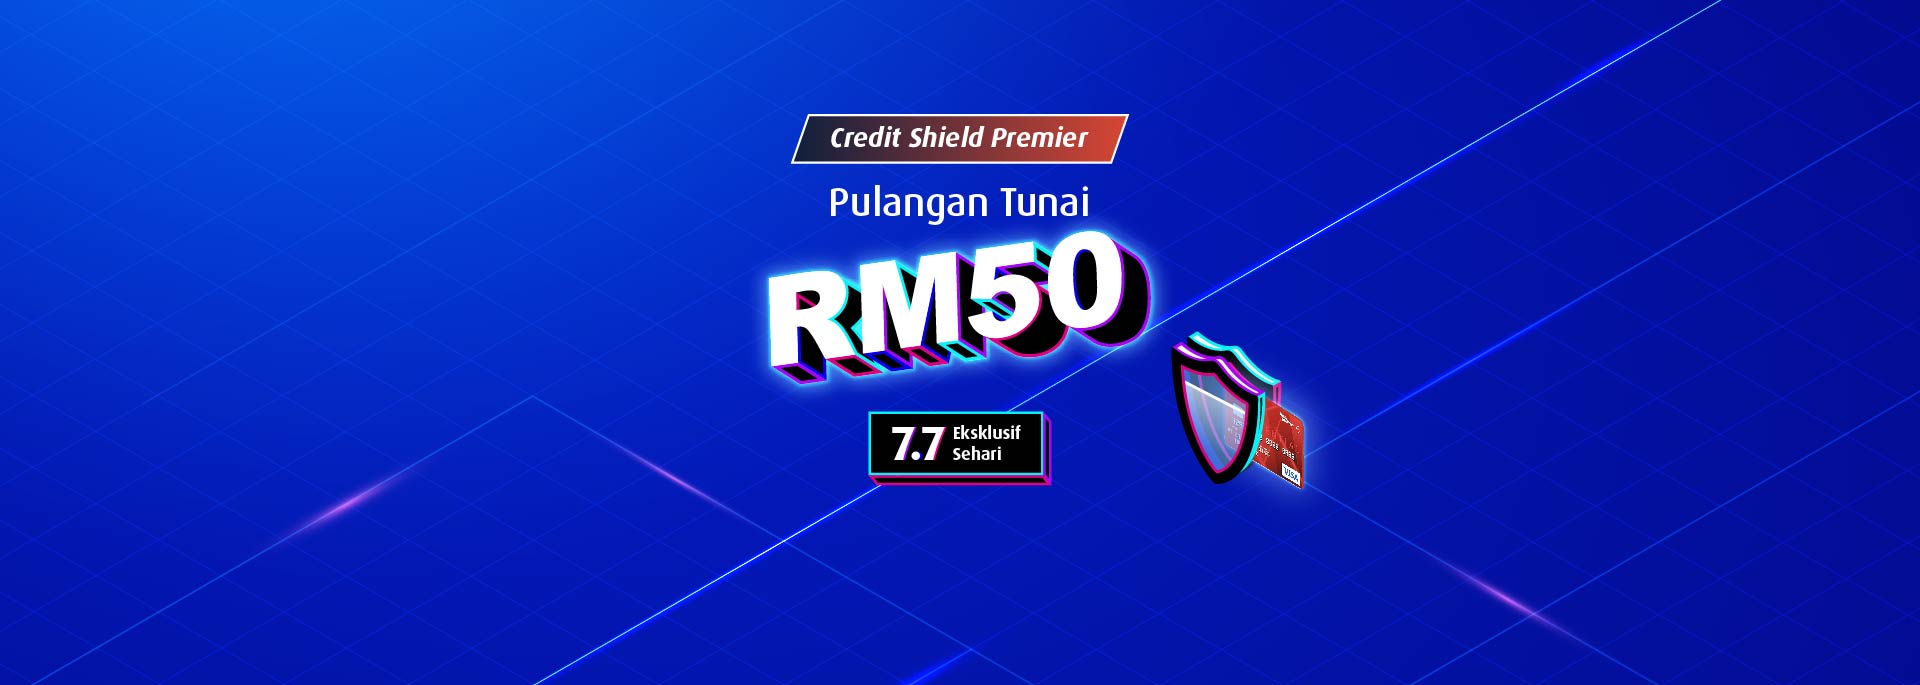 is csp connect day 7 7 promotion 2023 banner bm